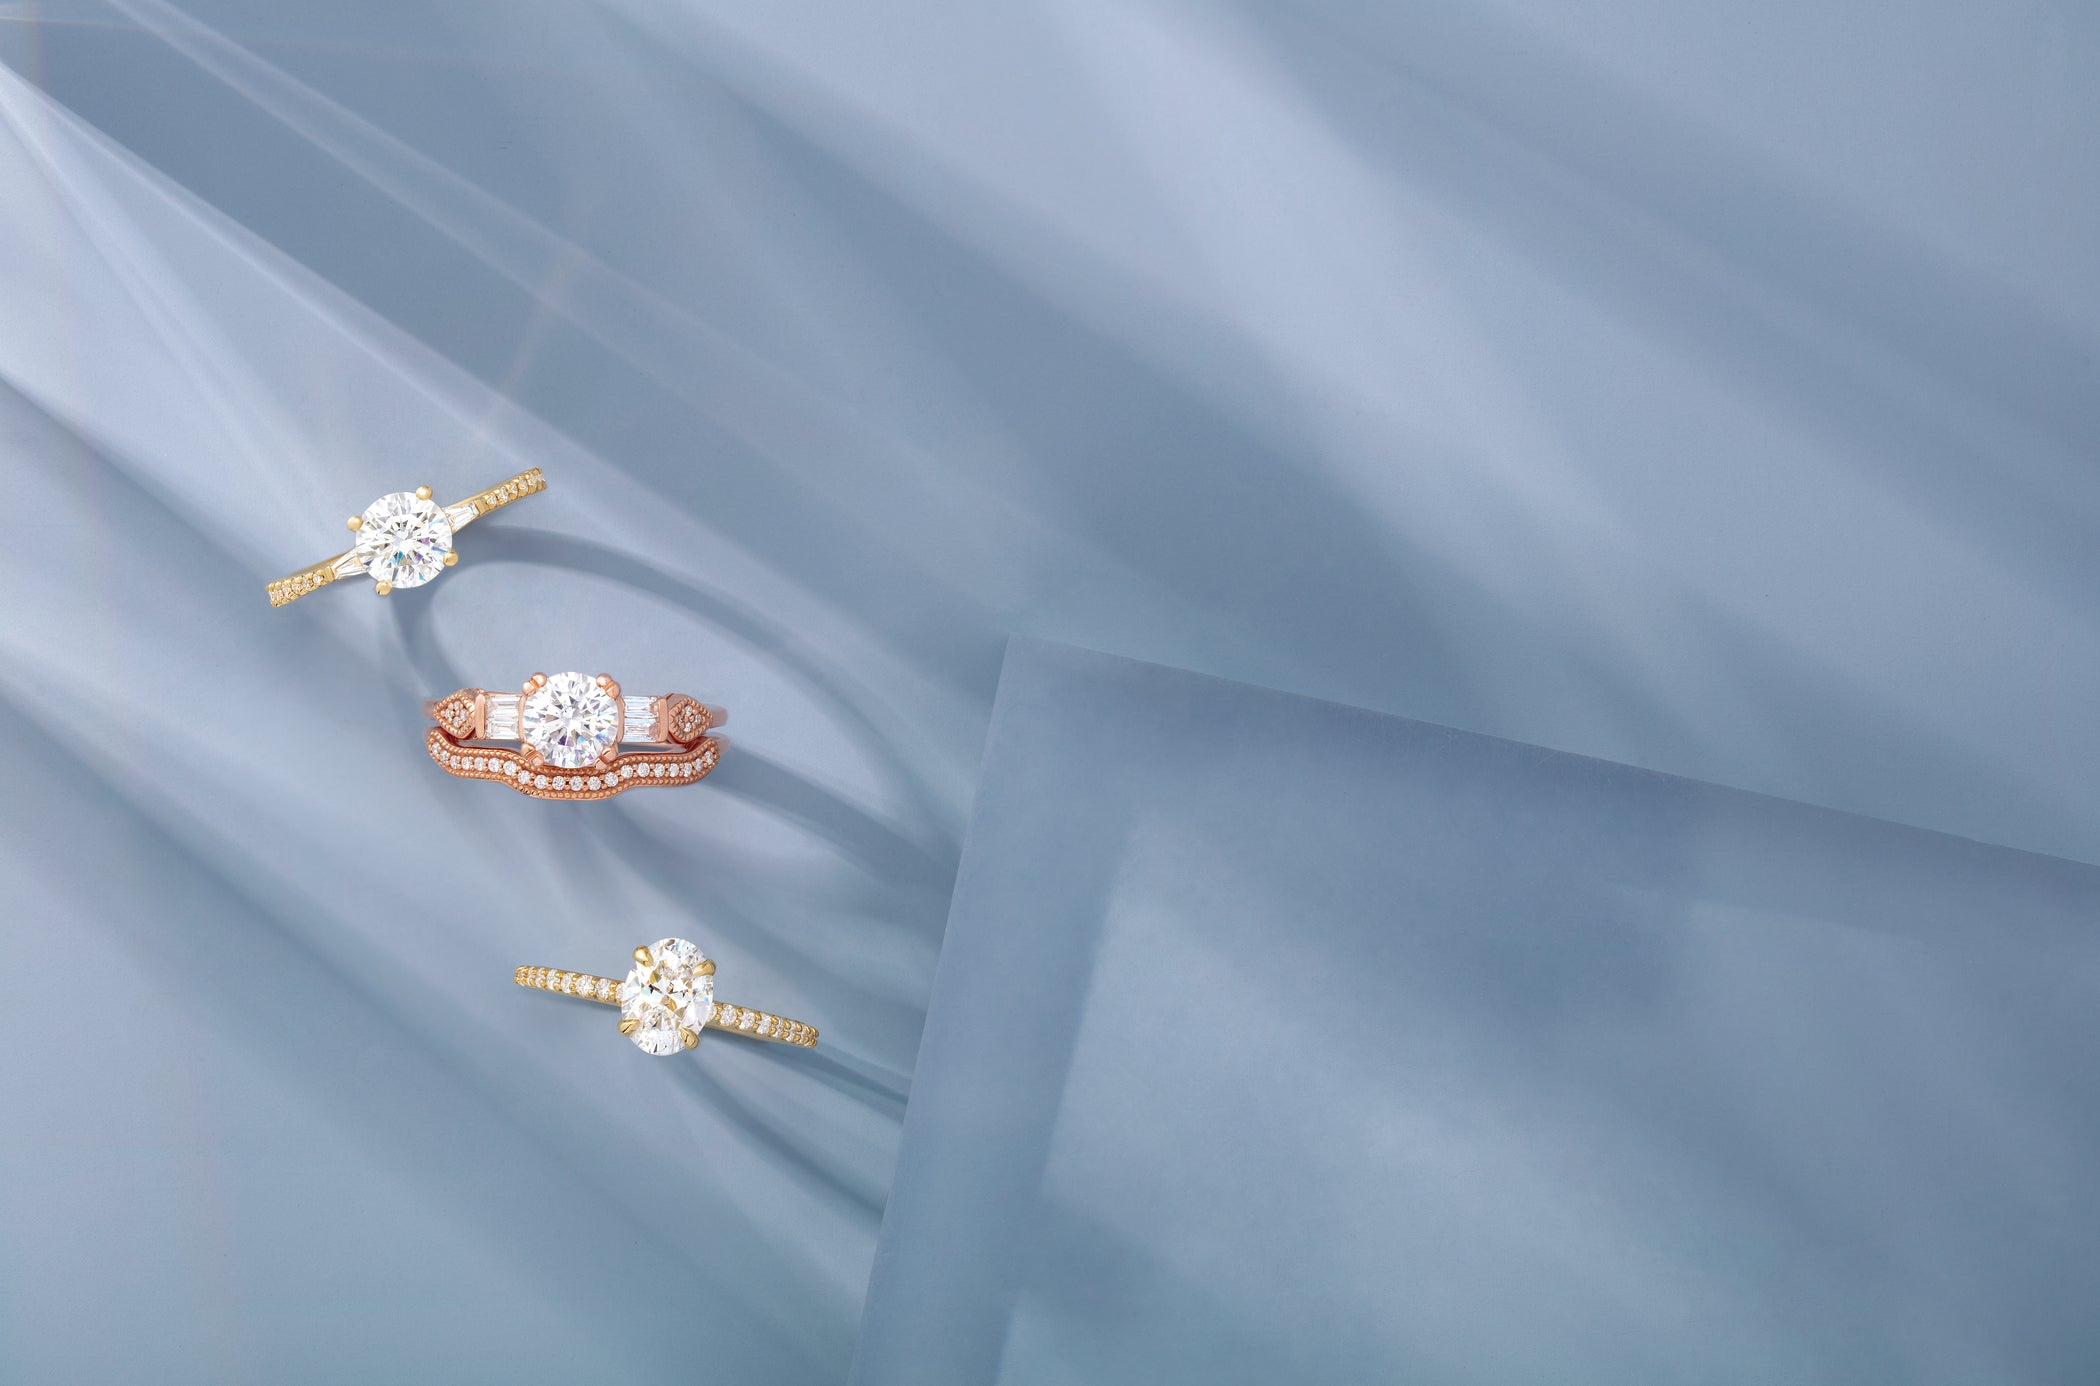 The ultimate guide to choosing engagement rings💍 | Gallery posted by Ria🐚  | Lemon8